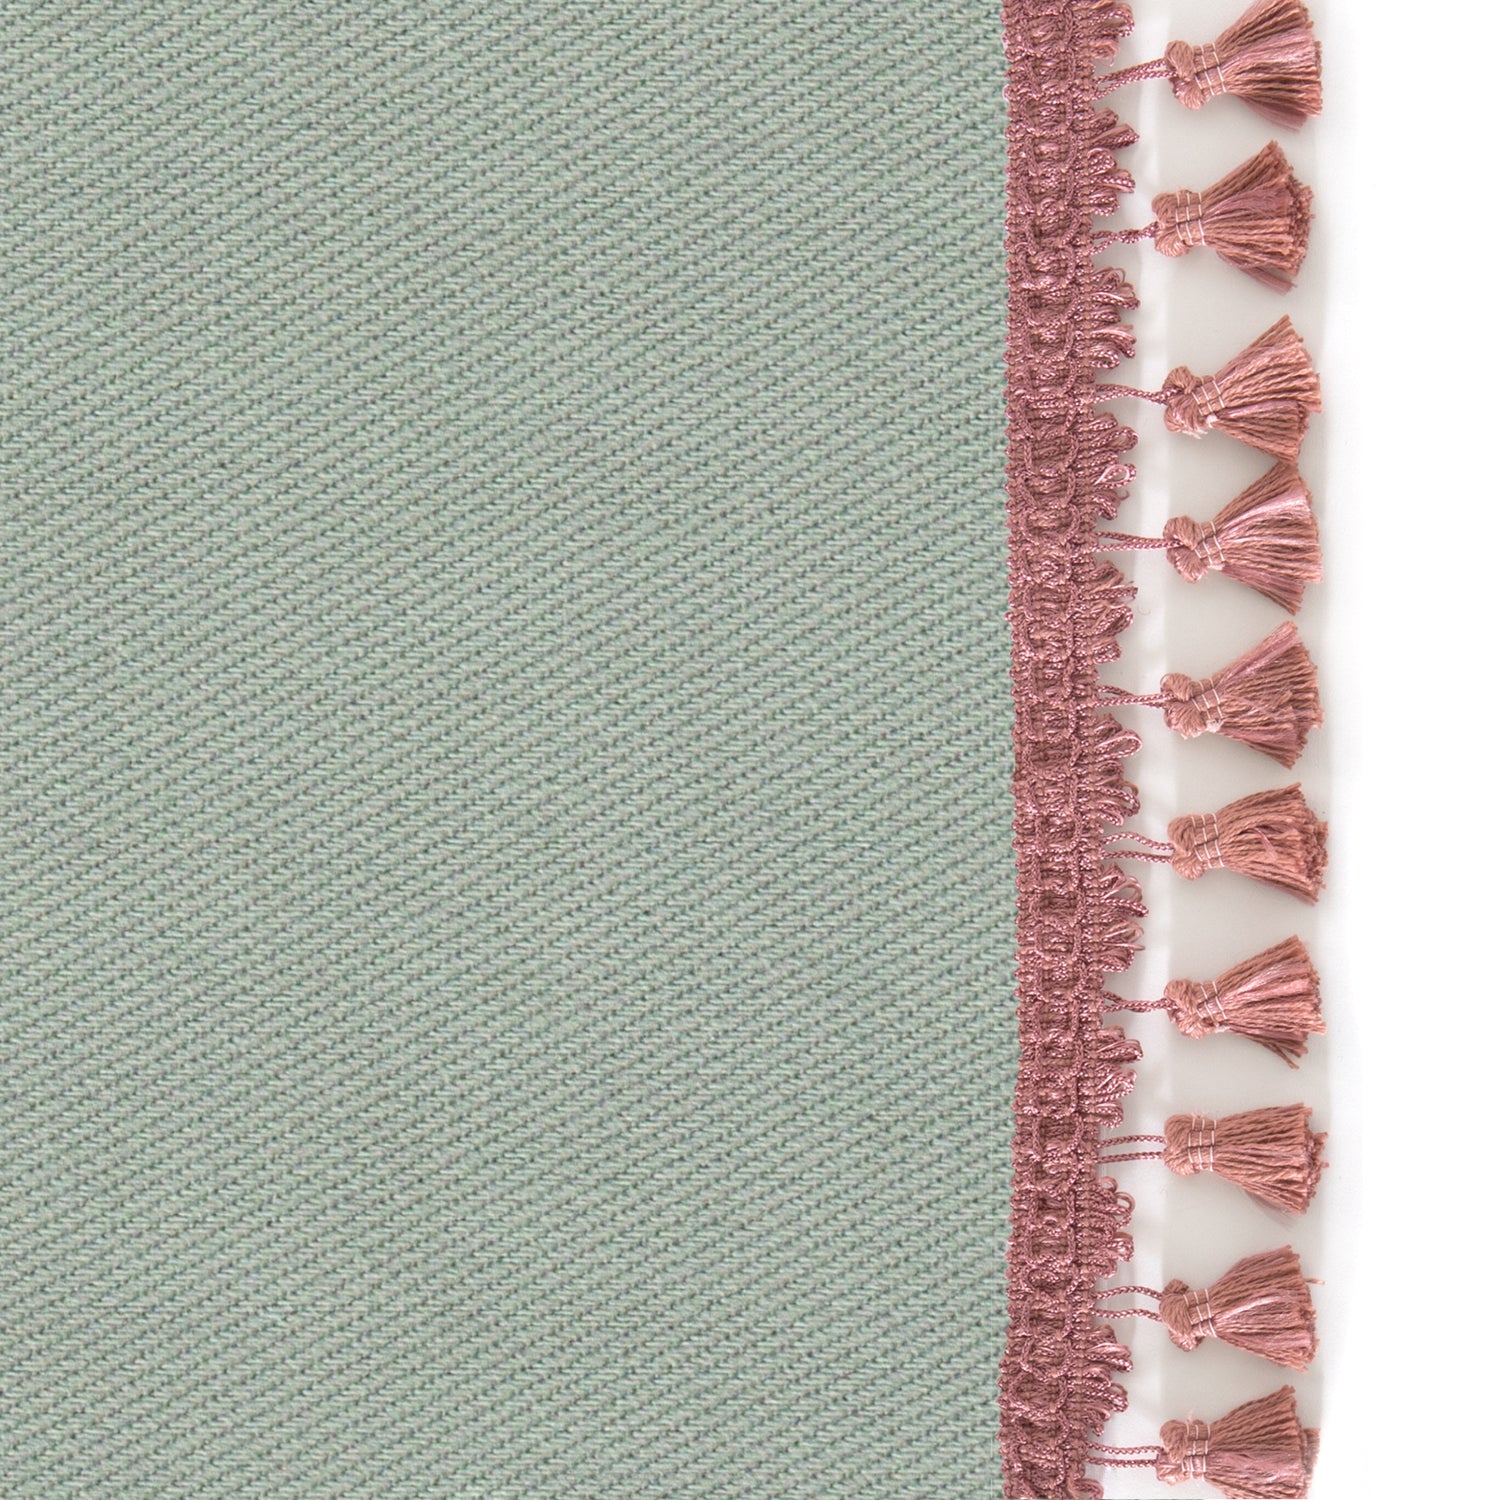 Upclose picture of Sage custom Sage Greenshower curtain with rose tassel trim